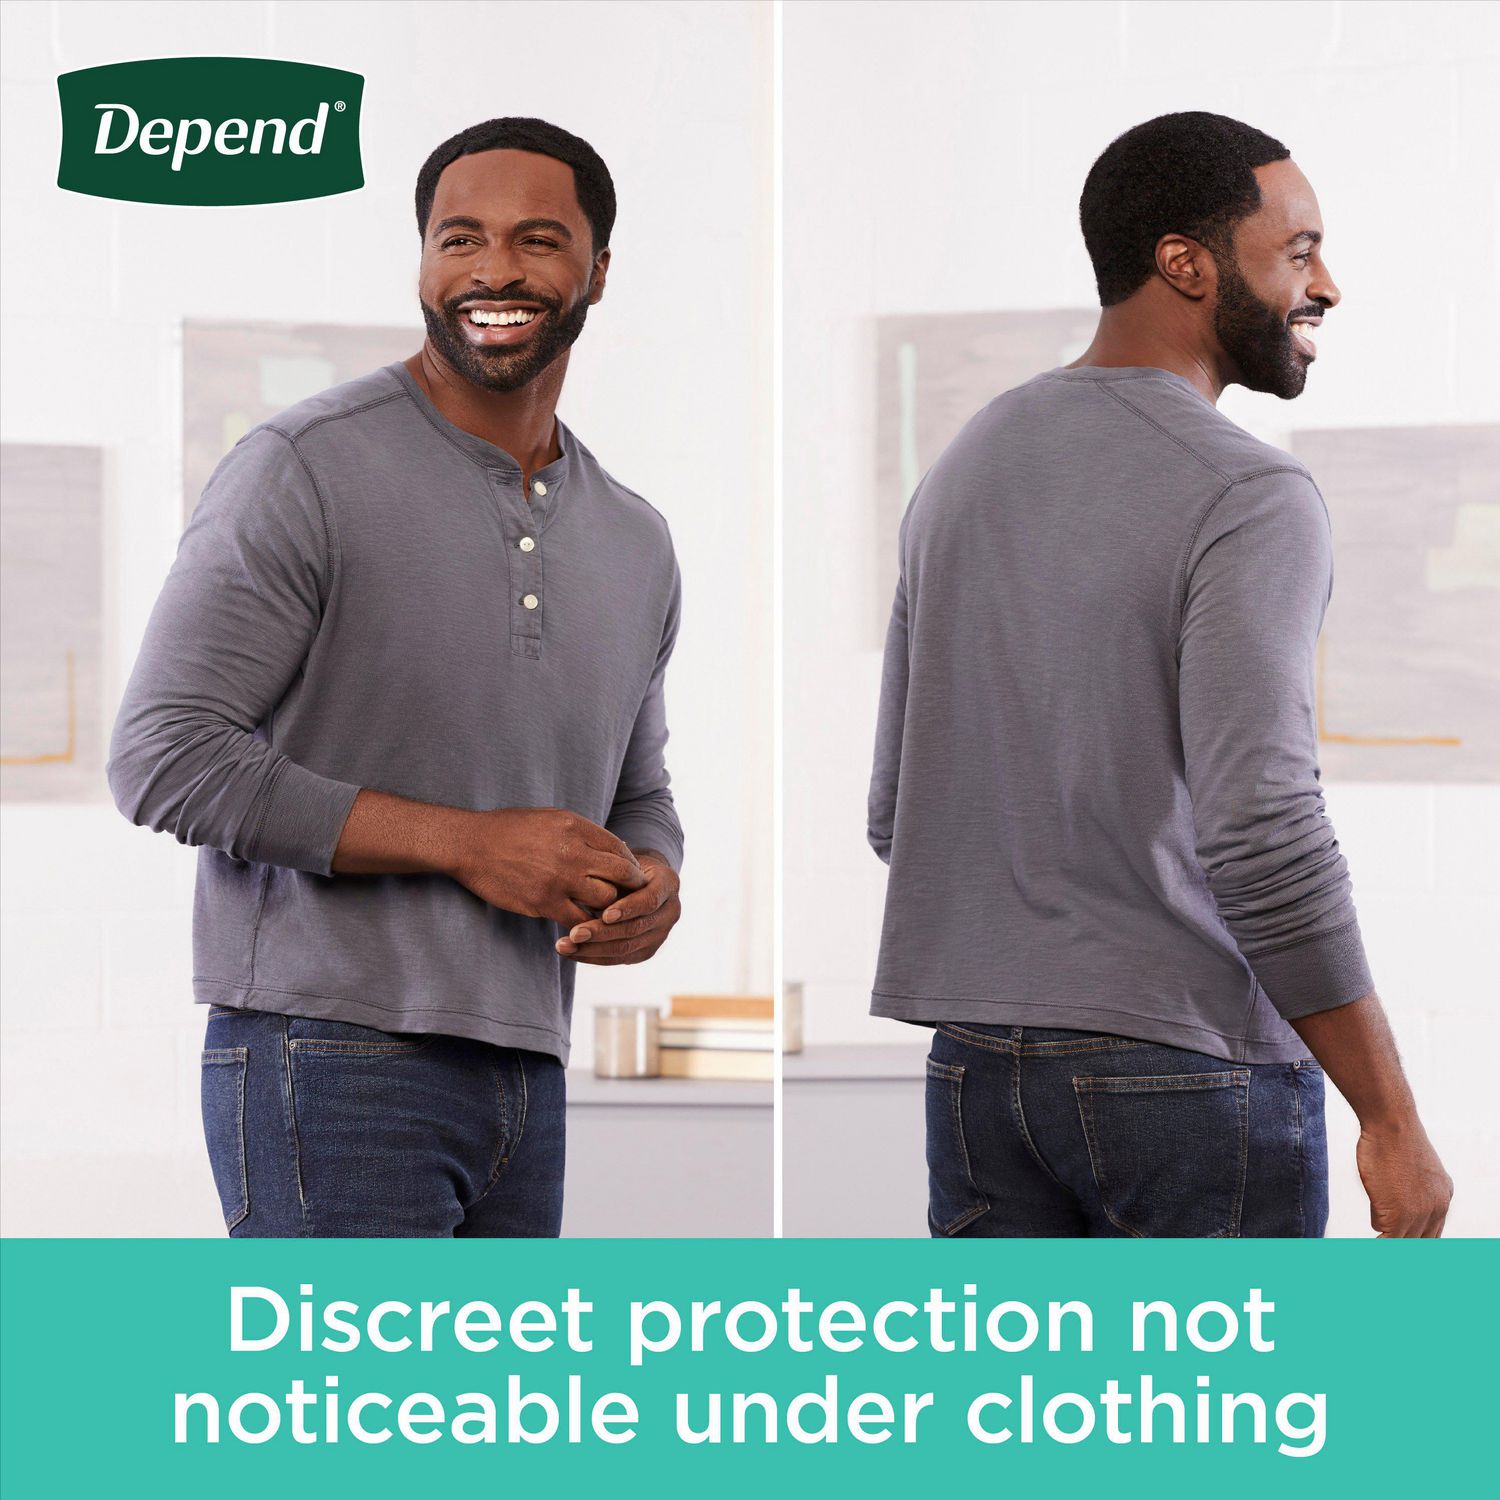 Depend Fresh Protection Adult Incontinence Underwear for Men (Formerly Depend  Fit-Flex), Disposable, Maximum, Grey, 36 - 44 Count 